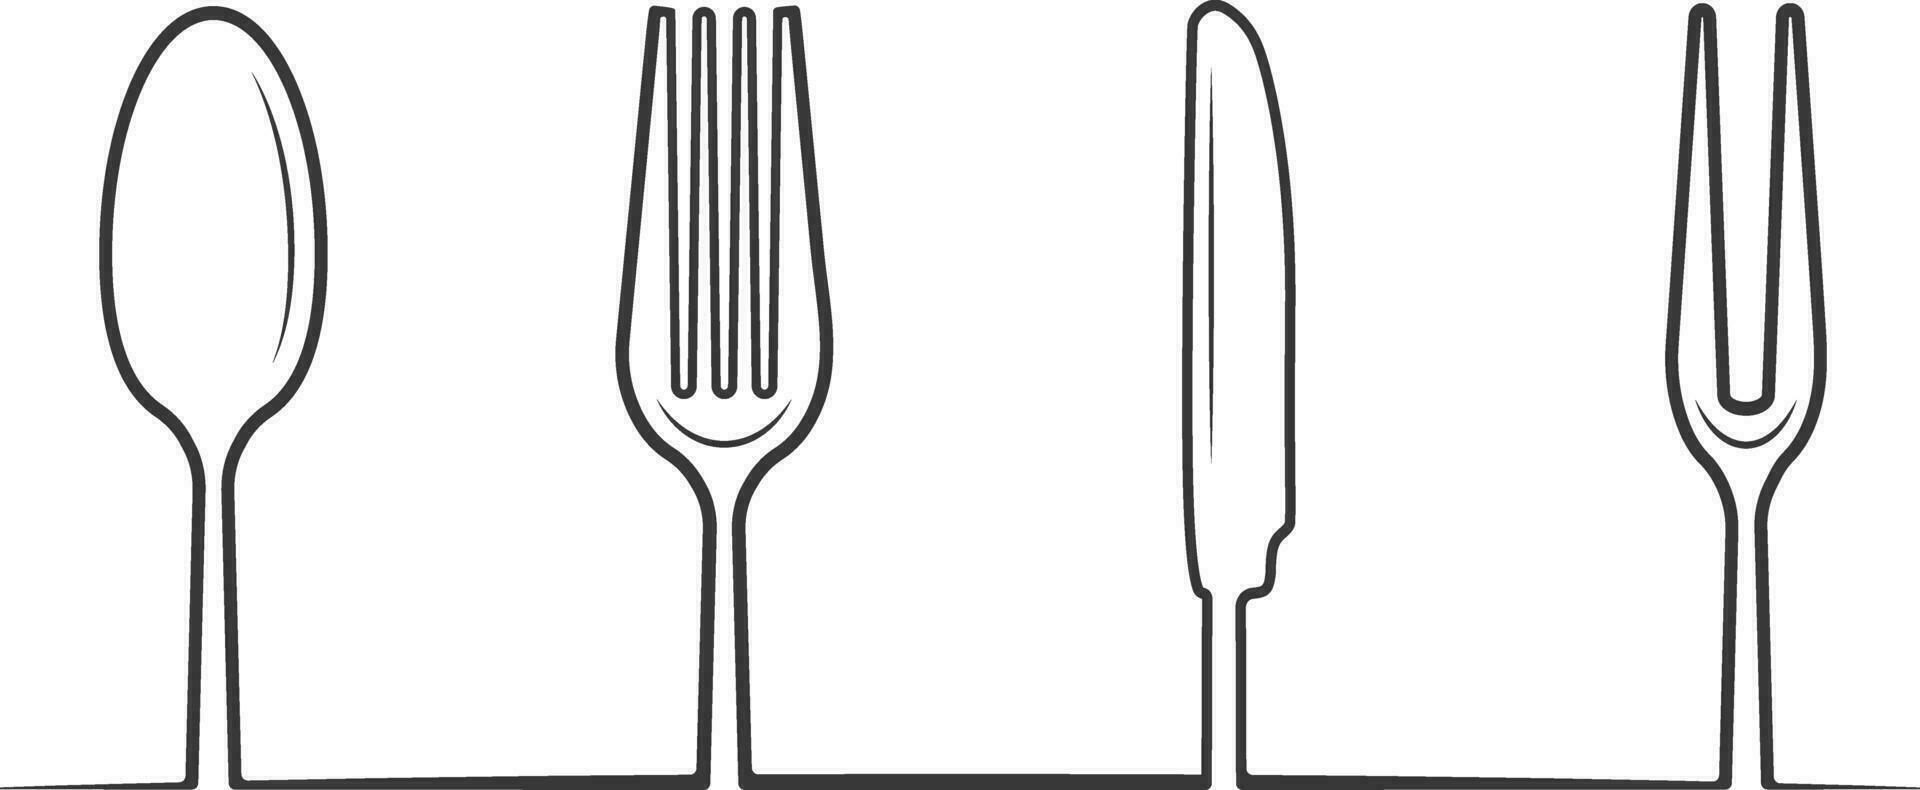 Cutlery Outline, Cutlery Silhouette, Fork Vector, Restaurant Equipment, Clip Art, Fork Spoon and Knife Outline vector